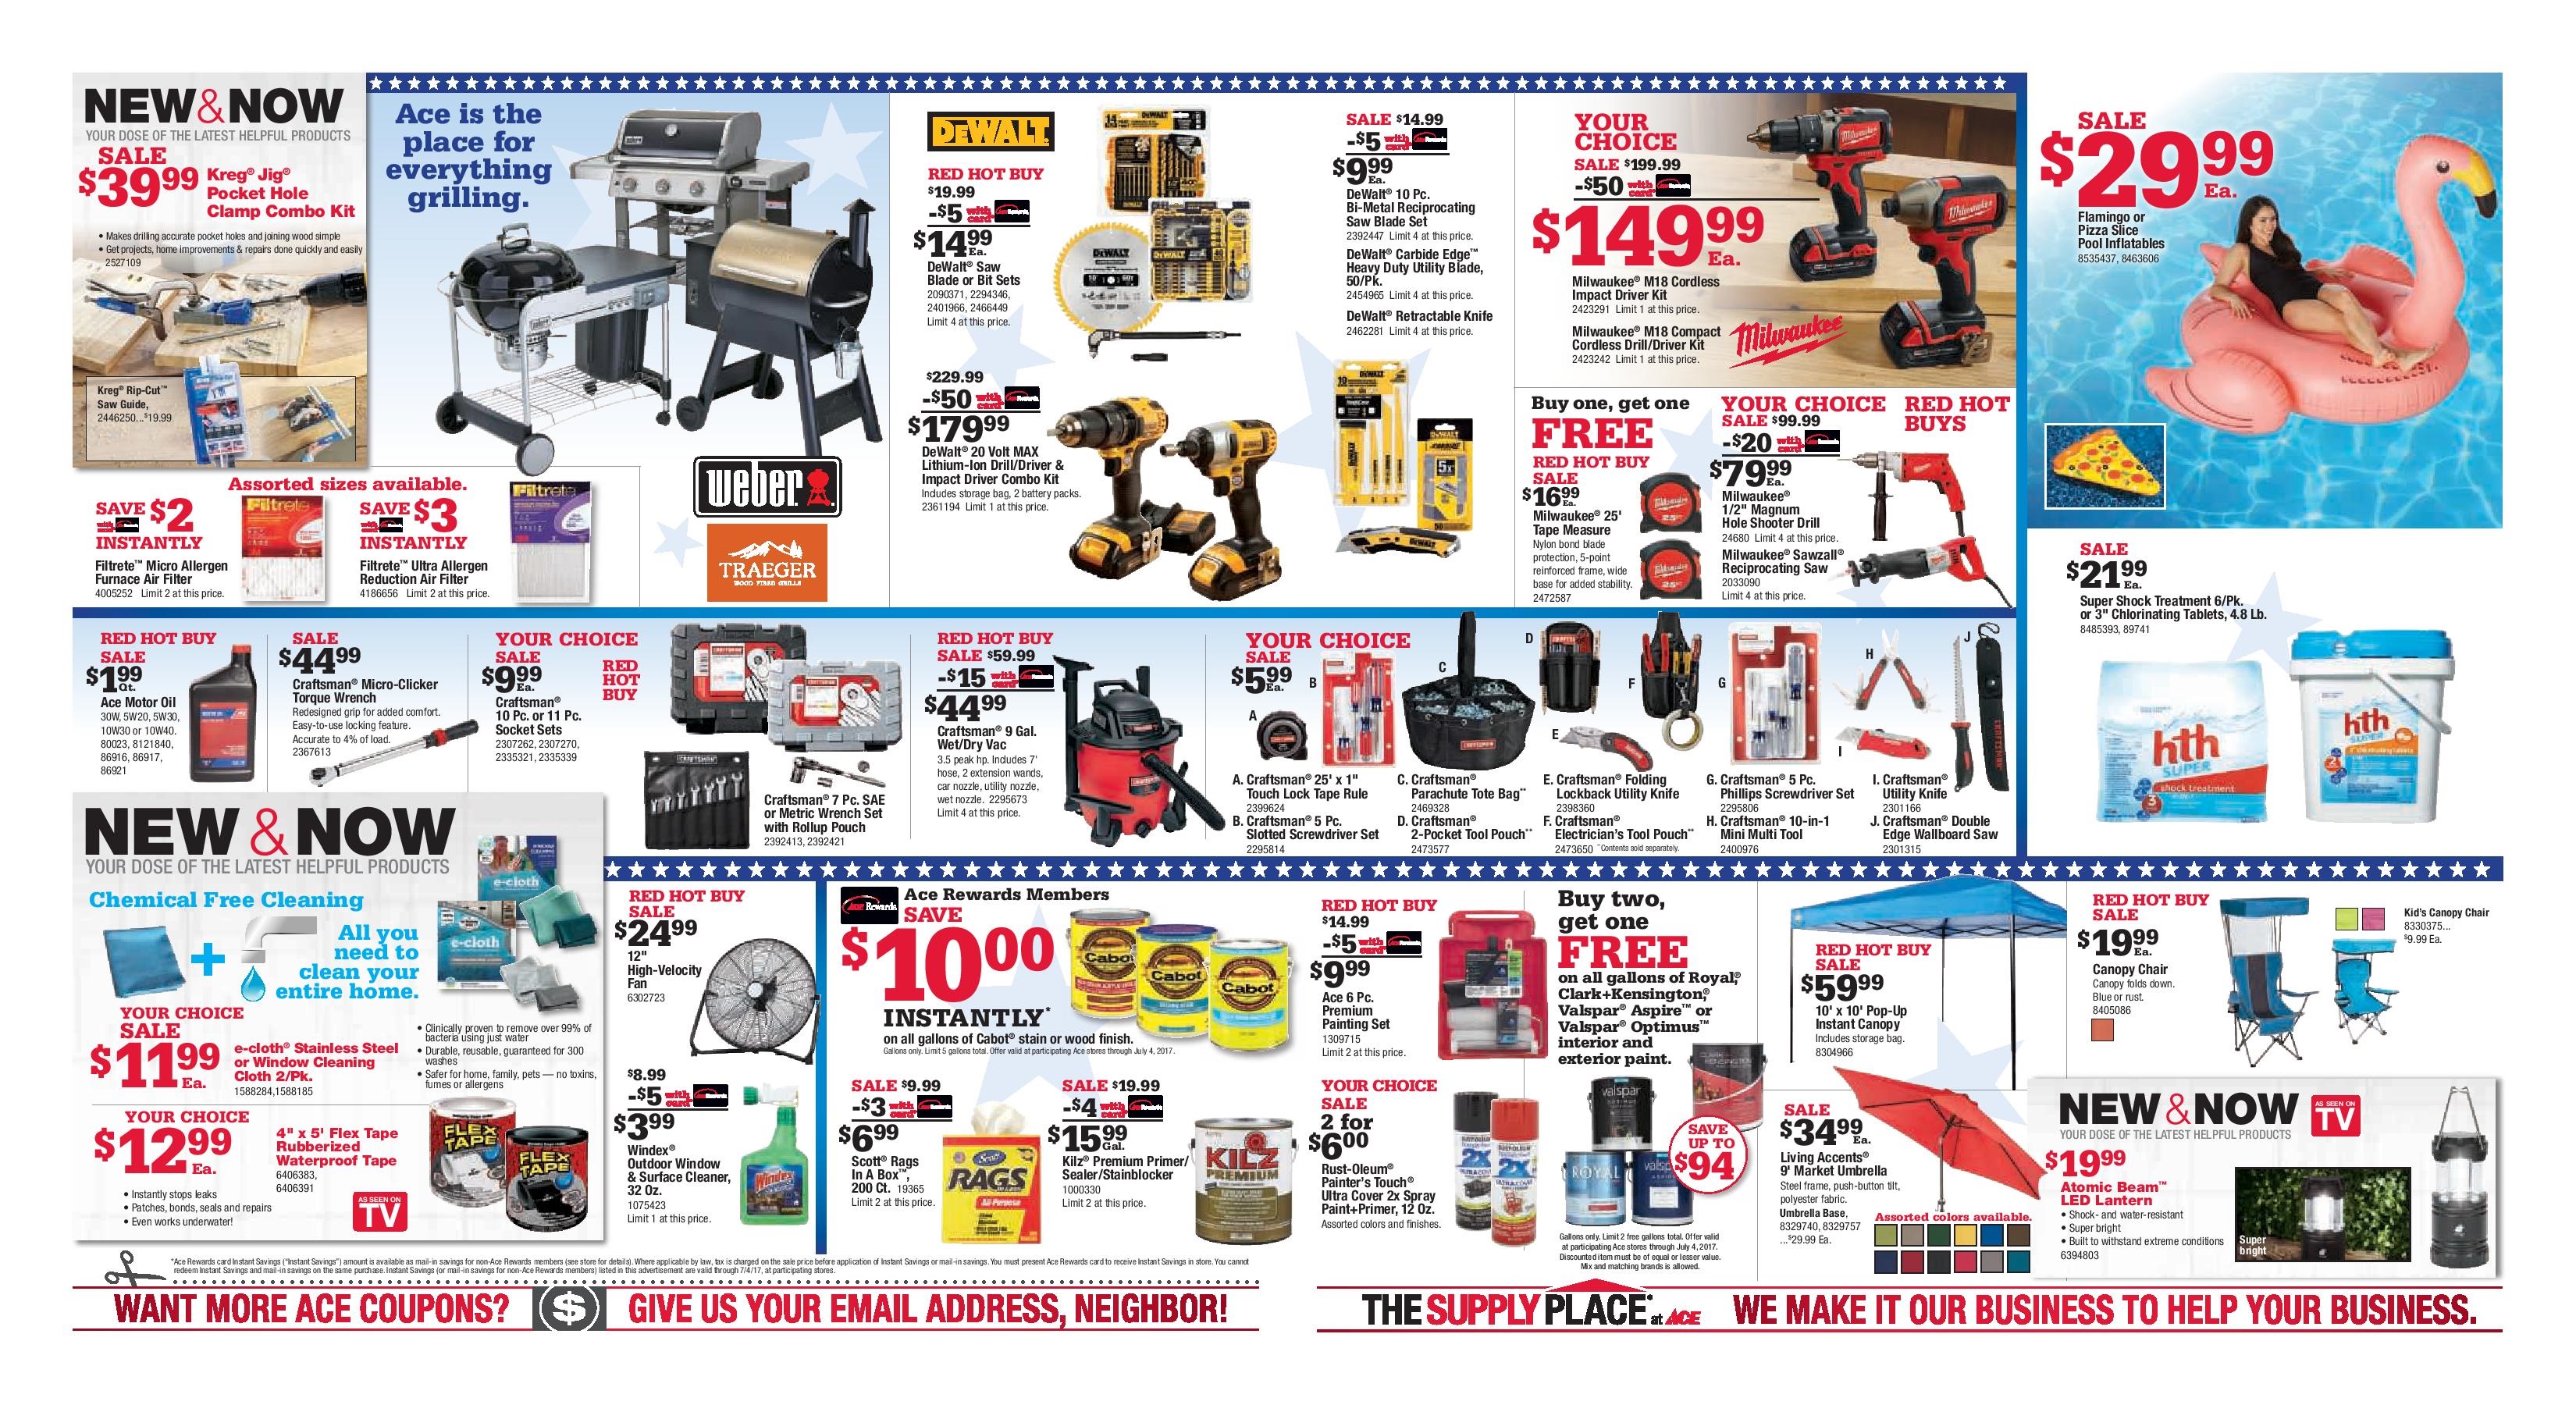 2017 4th of July Sale ad - pg 2&3